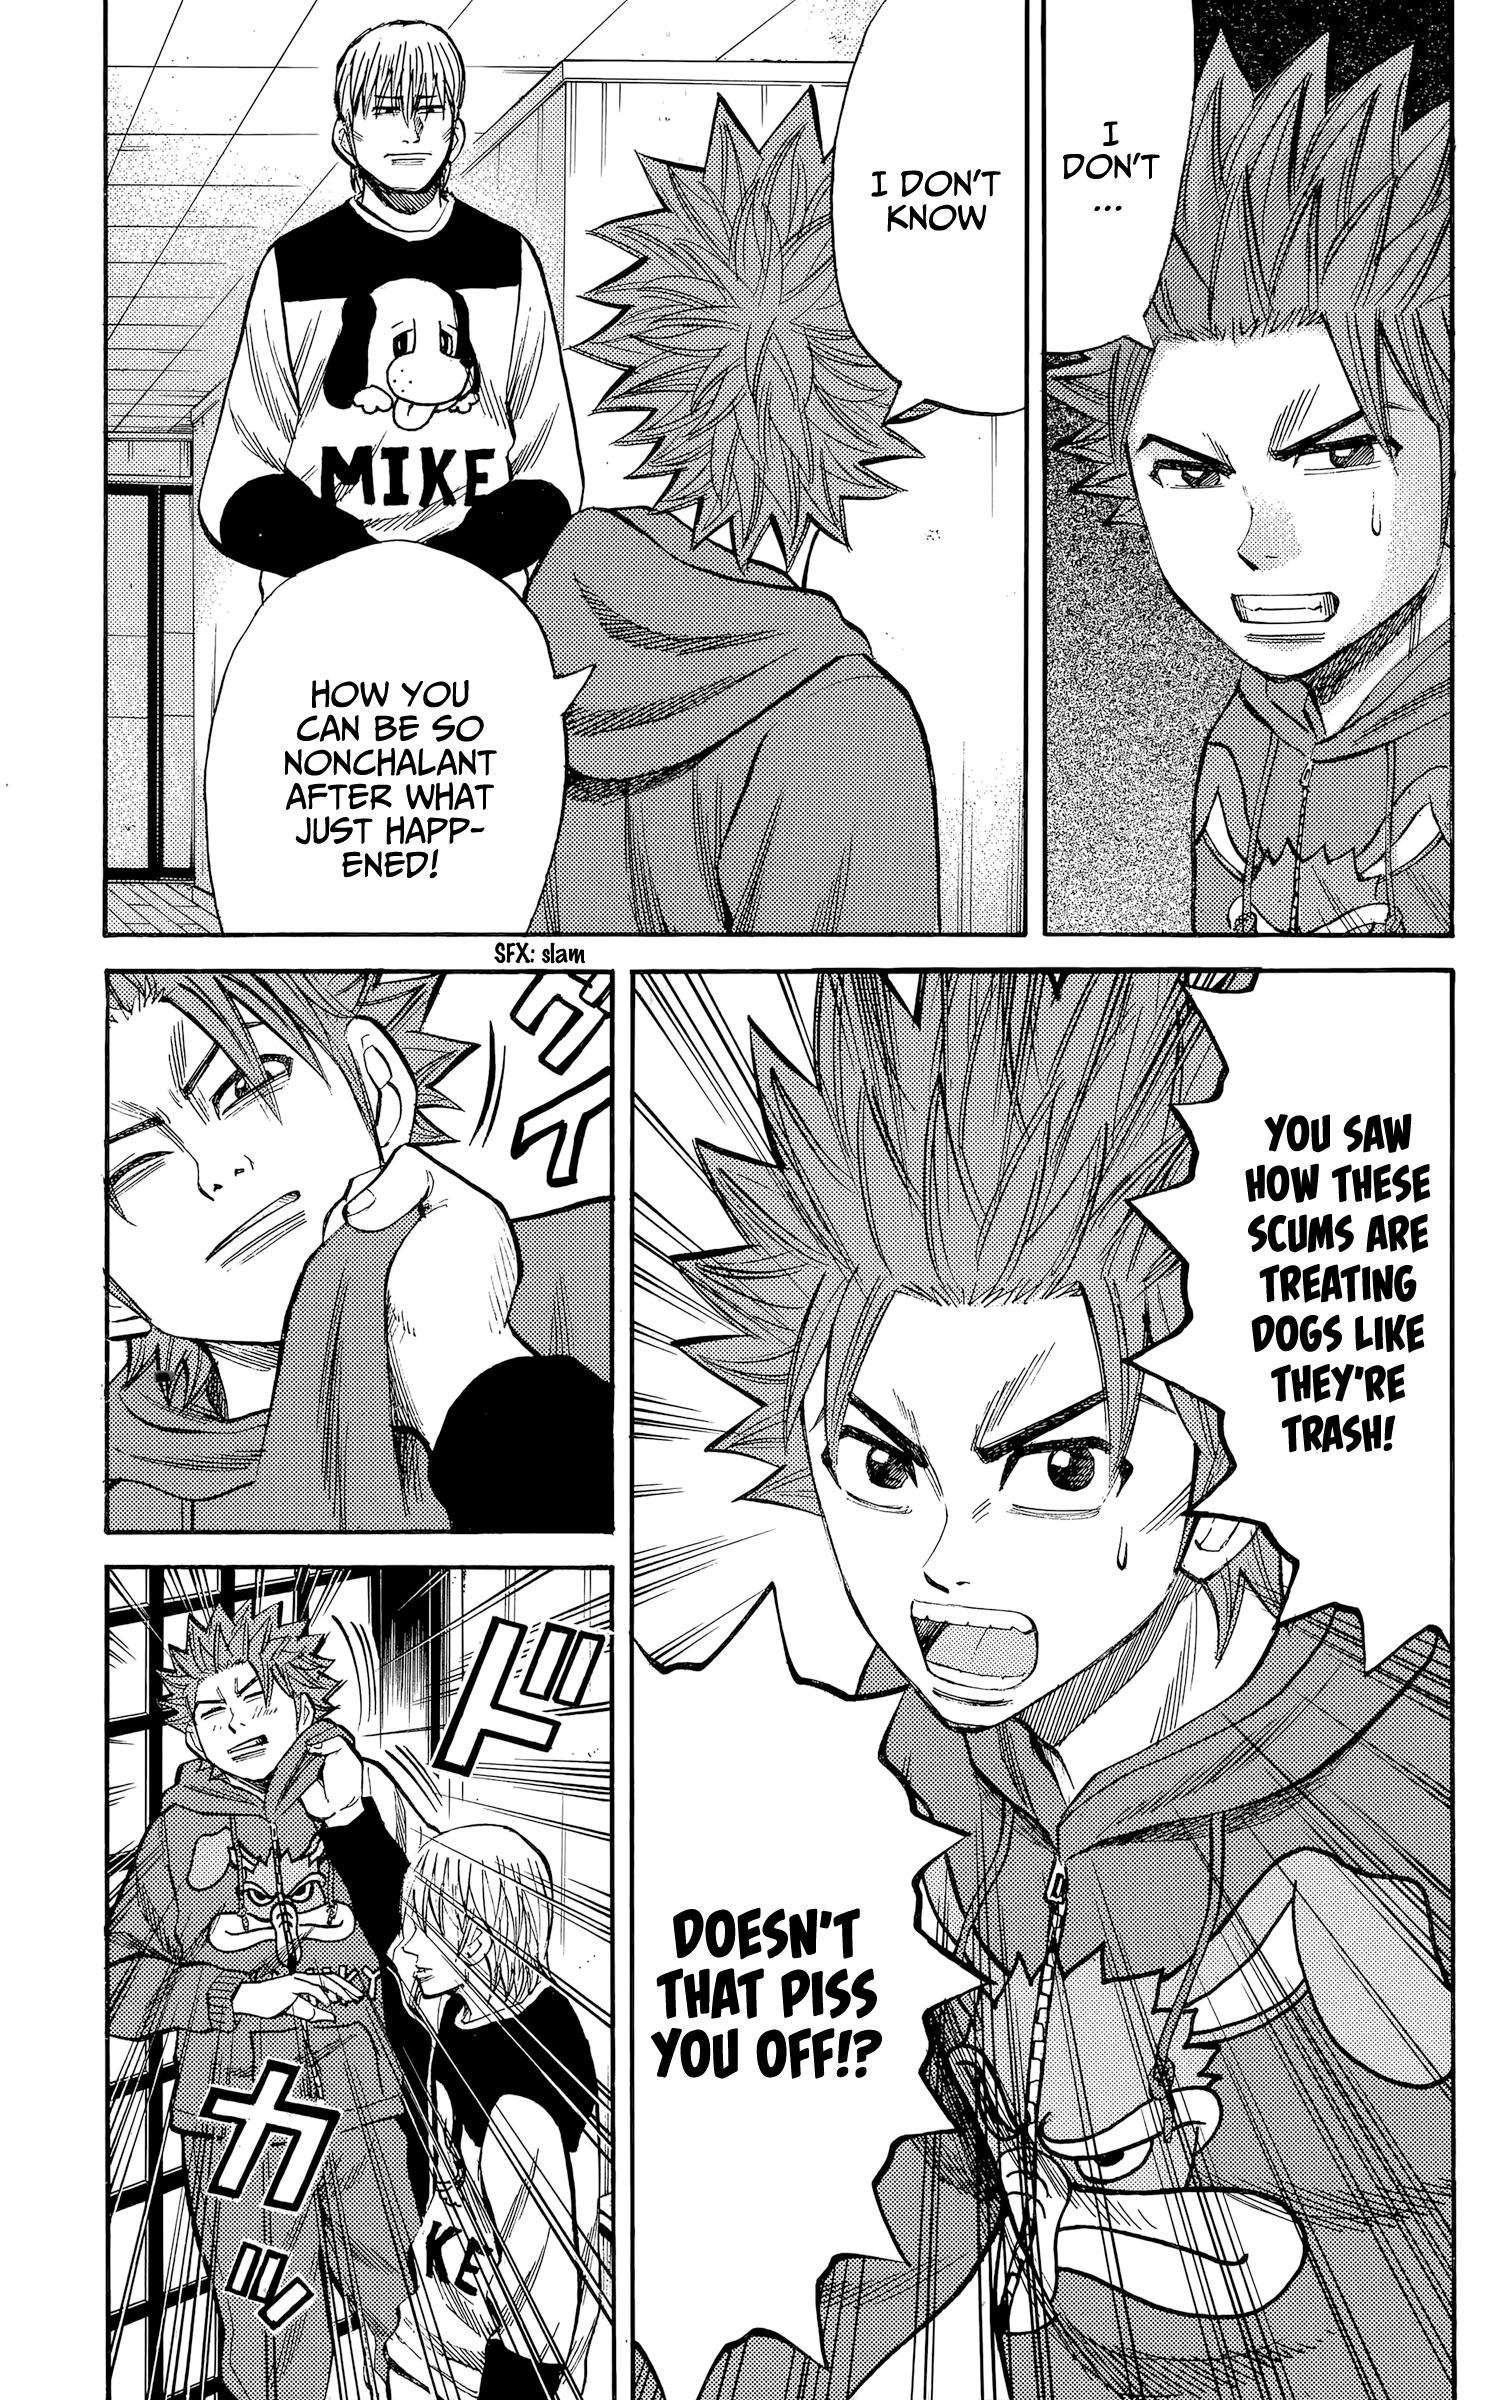 Nanba Mg5 Vol.12 Chapter 103: Takeshi! Get A Hold Of Yourself! - Picture 3